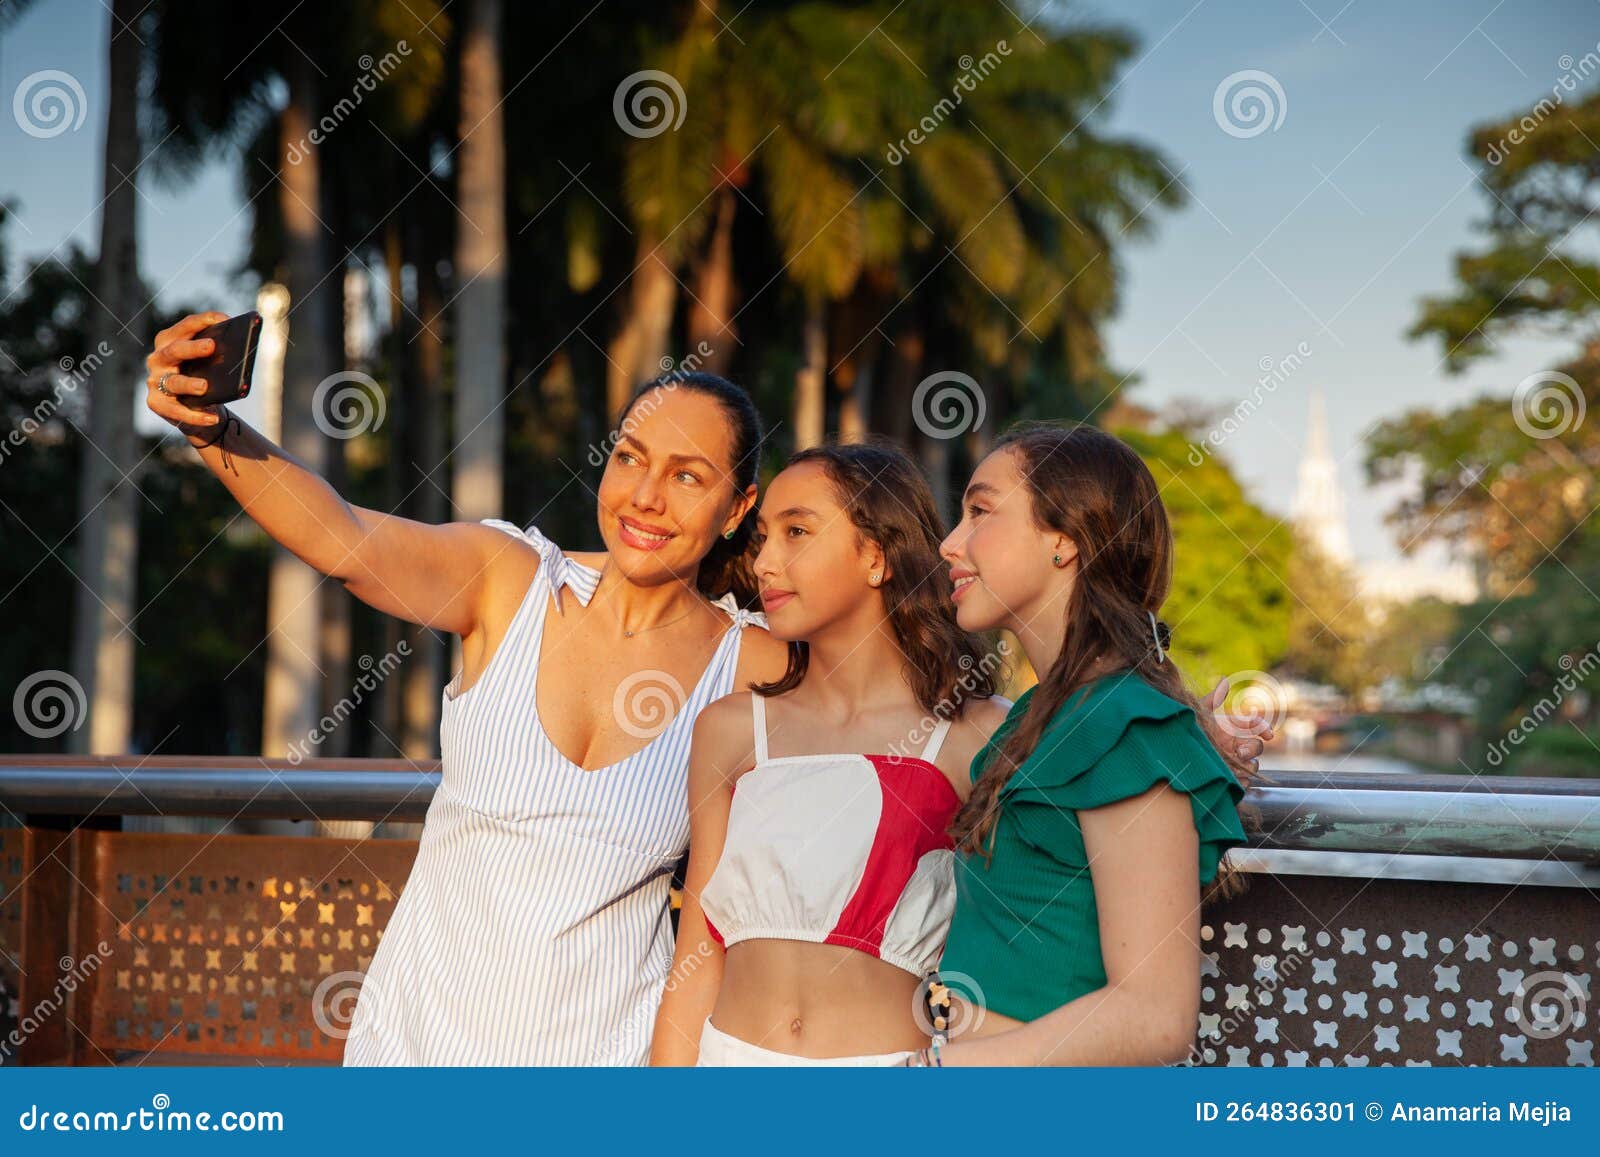 tourists taking a selfie in one of the bridges along the cali river boulevard with la ermita church on background in the city of